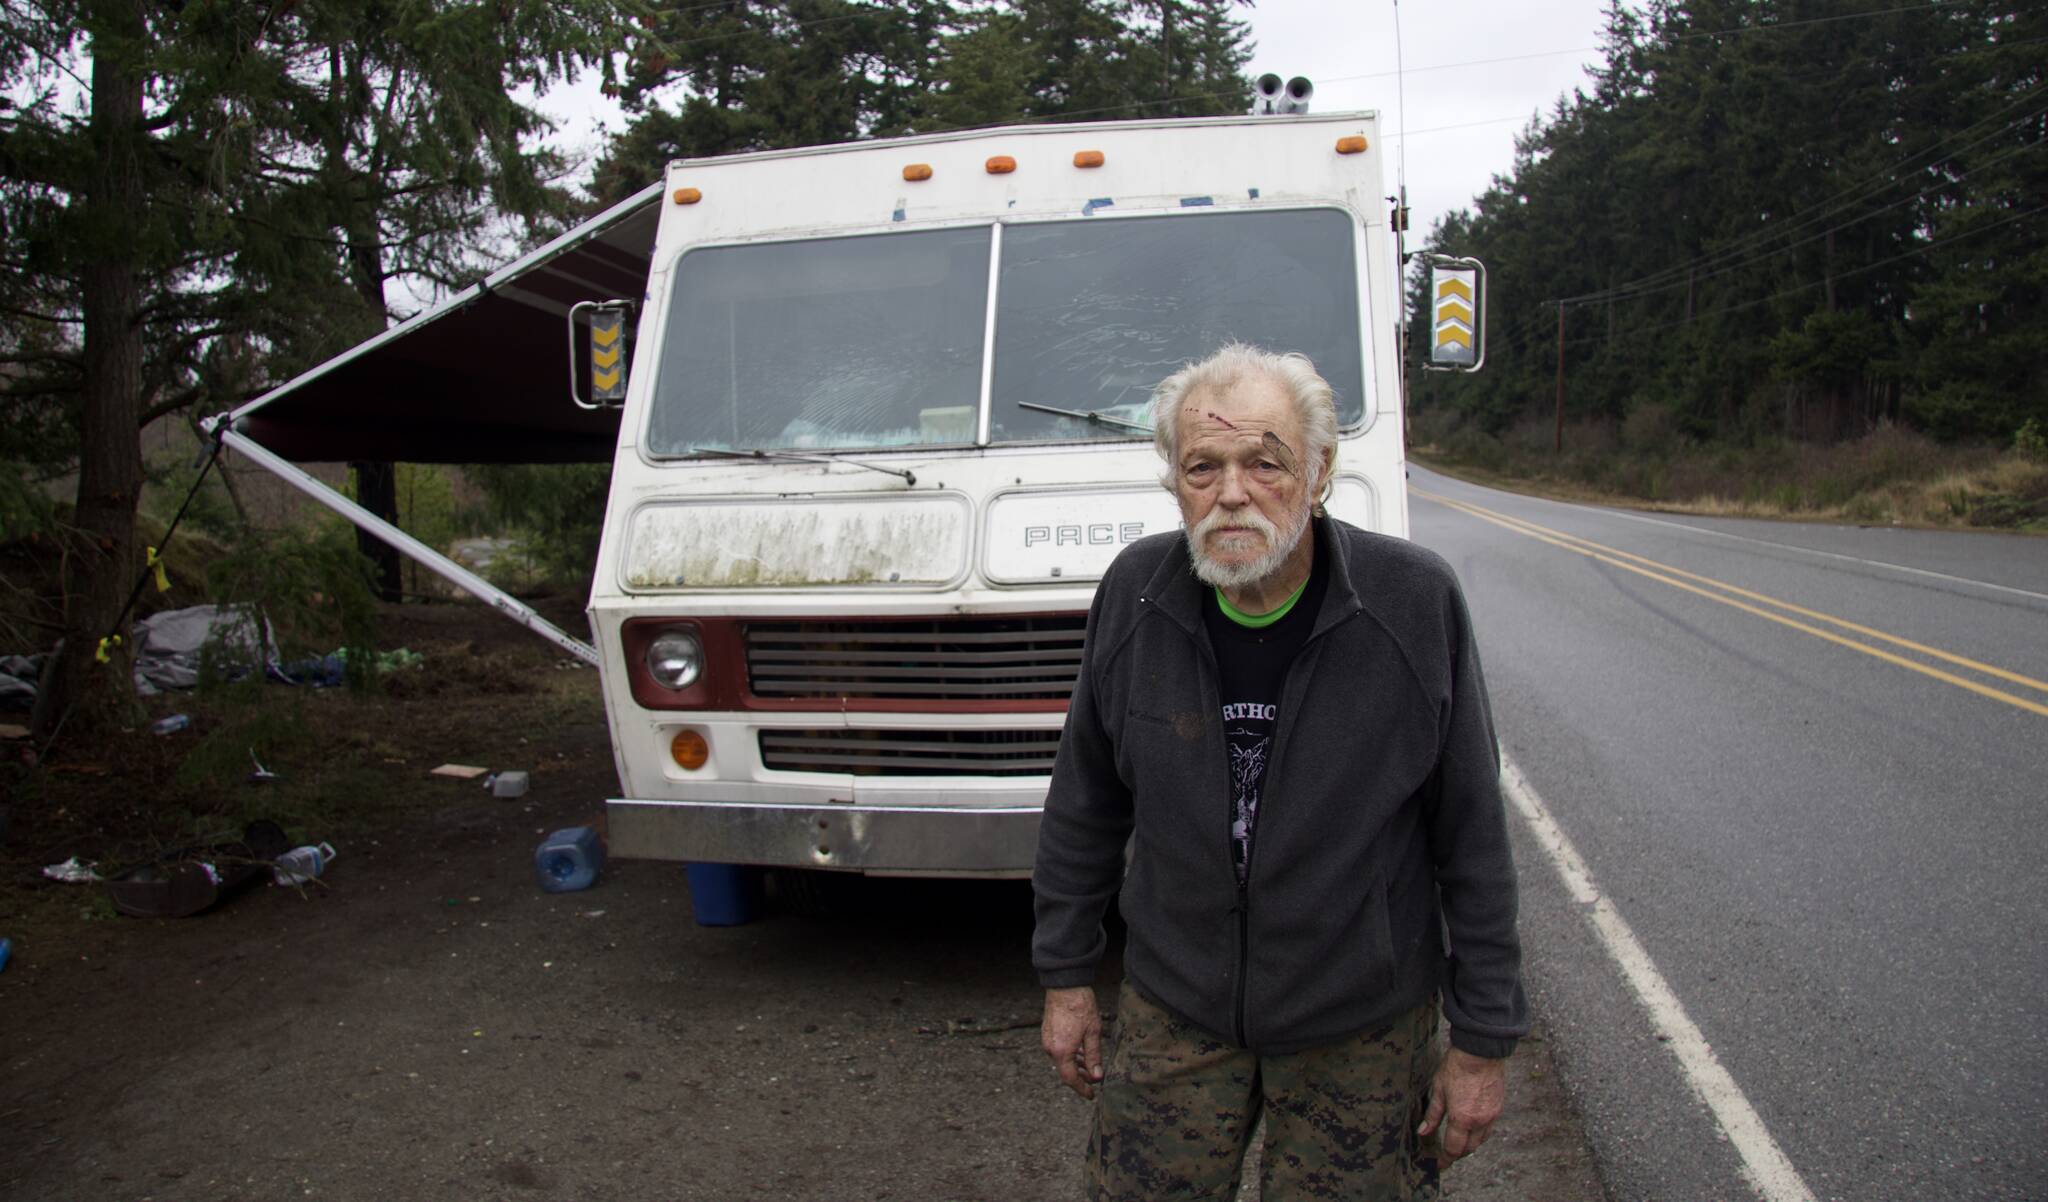 Photo by Rachel Rosen/Whidbey News-Times
Alvin Kent is a 72-year-old Vietnam veteran and a member of a roadside homeless camp on North Whidbey.